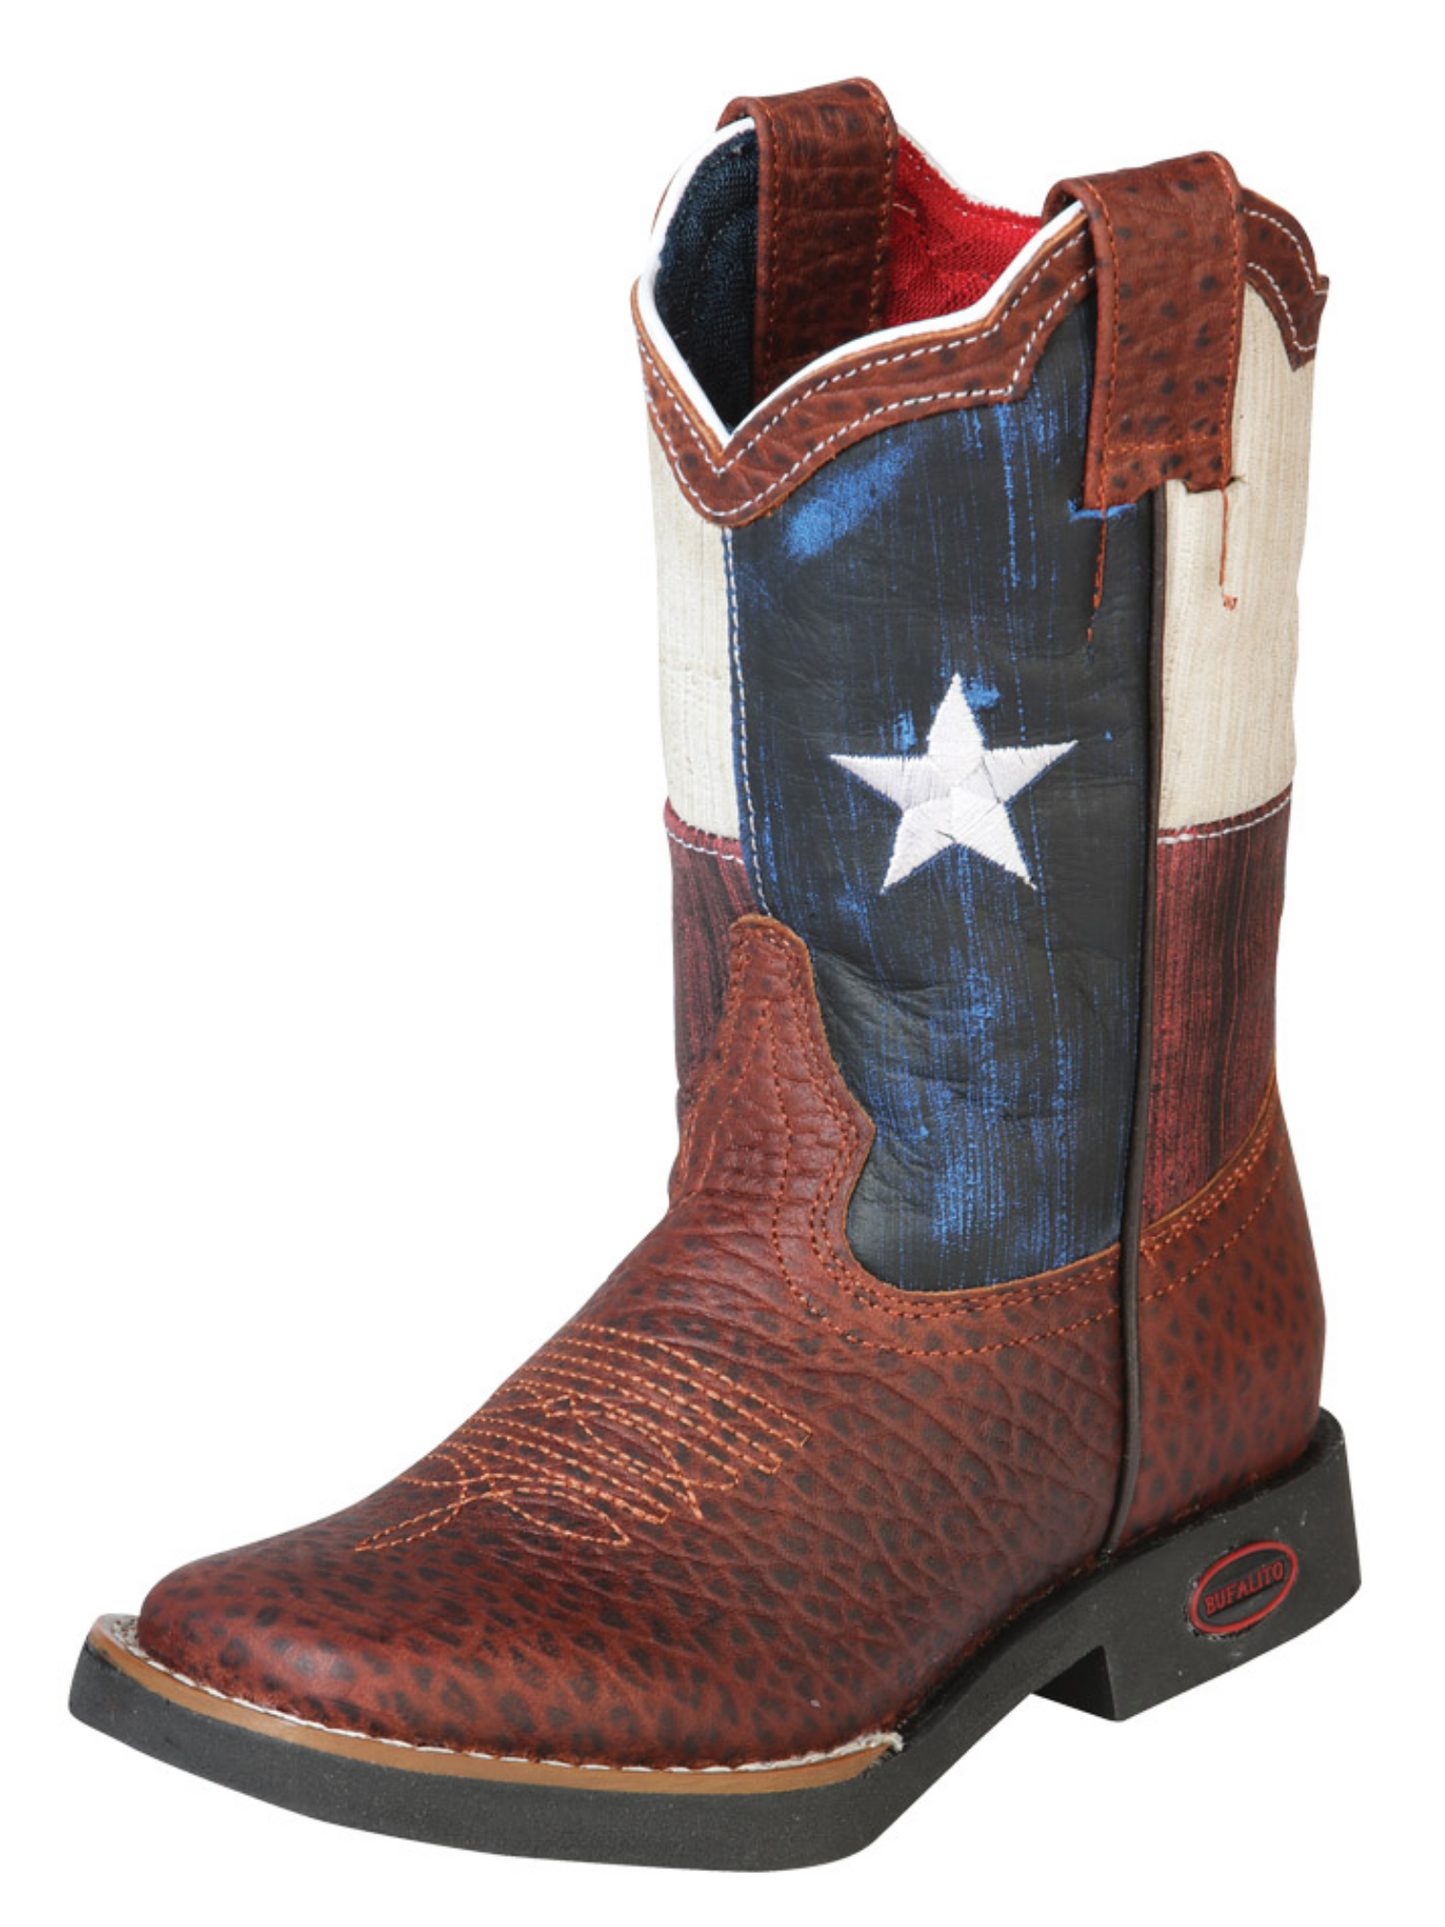 Kids - Classic Genuine Leather Rodeo Cowboy Boots for Children 'Jar Boots' - ID: 126592